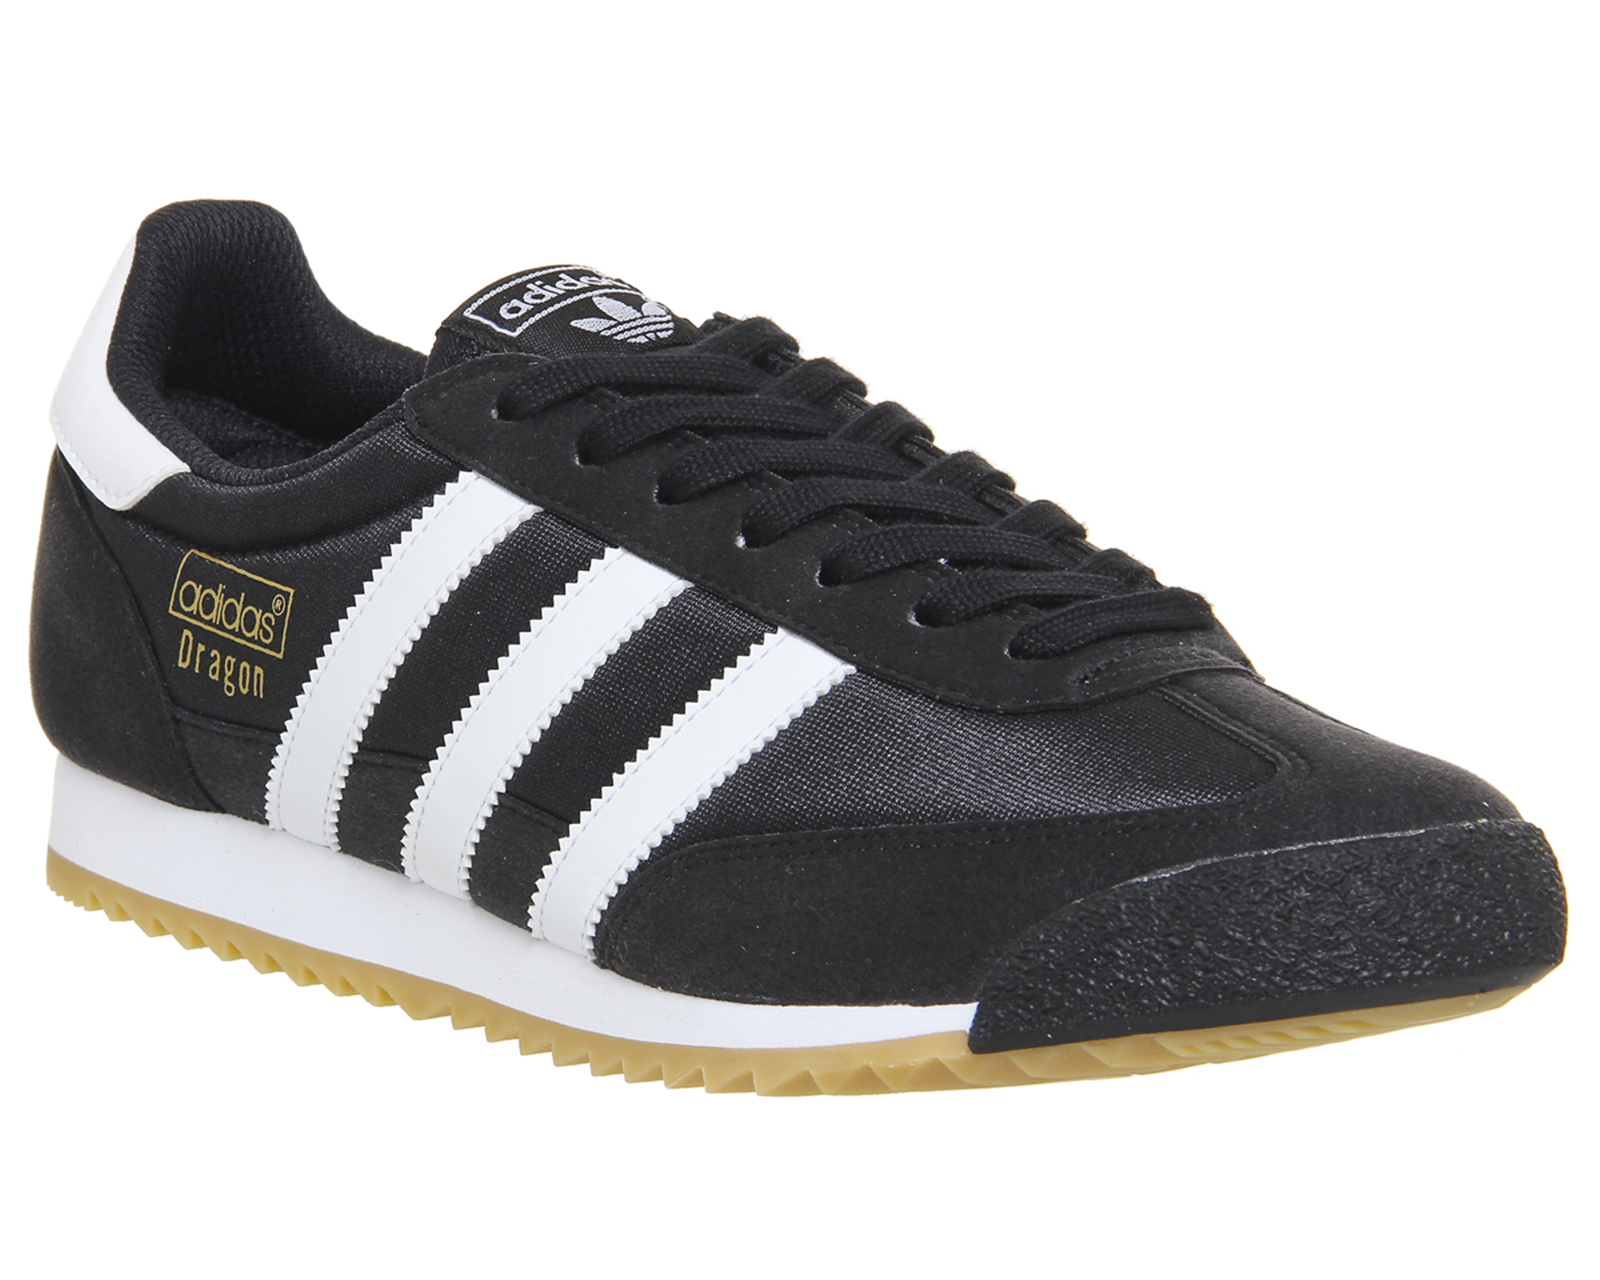 adidas dragon trainers cheap online